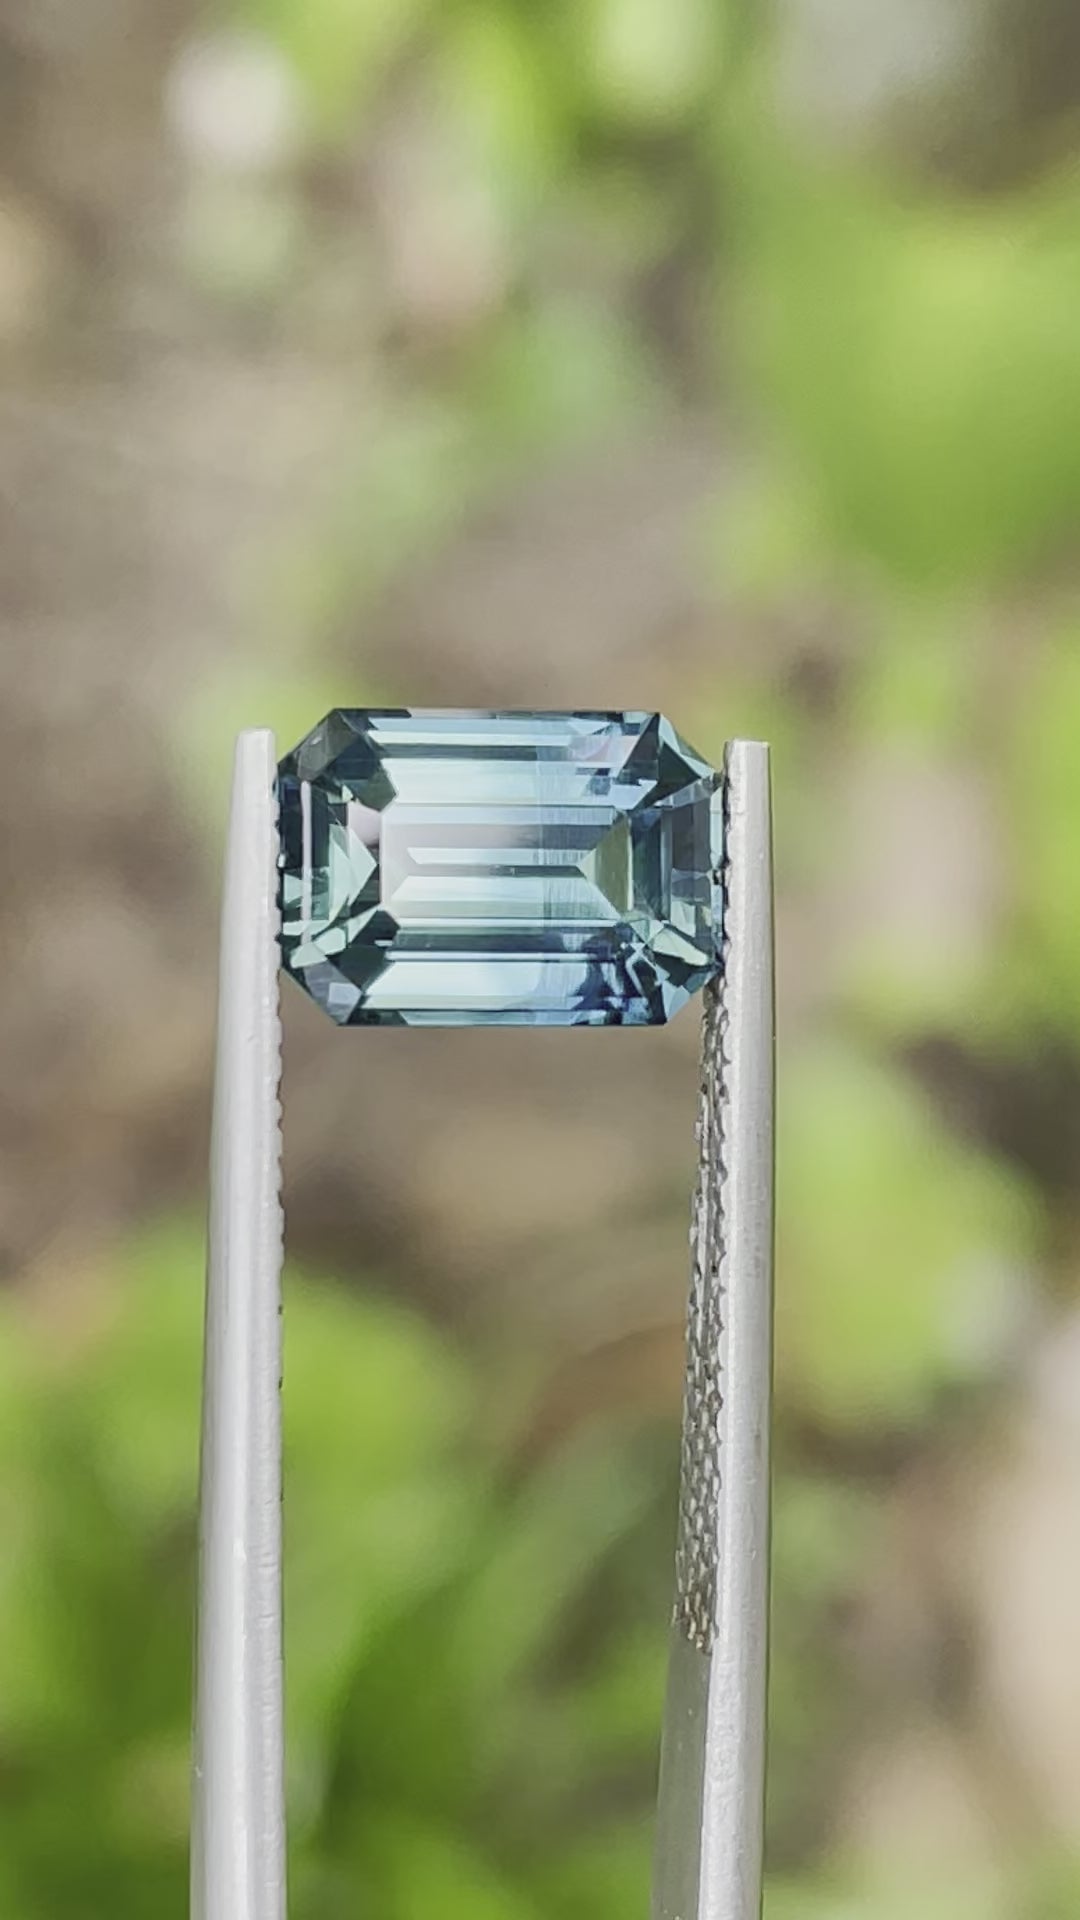 Teal Sapphire - 3.15 CT - Emerald- Madagascar- Fine Sapphire For Bespoke Engagement Ring